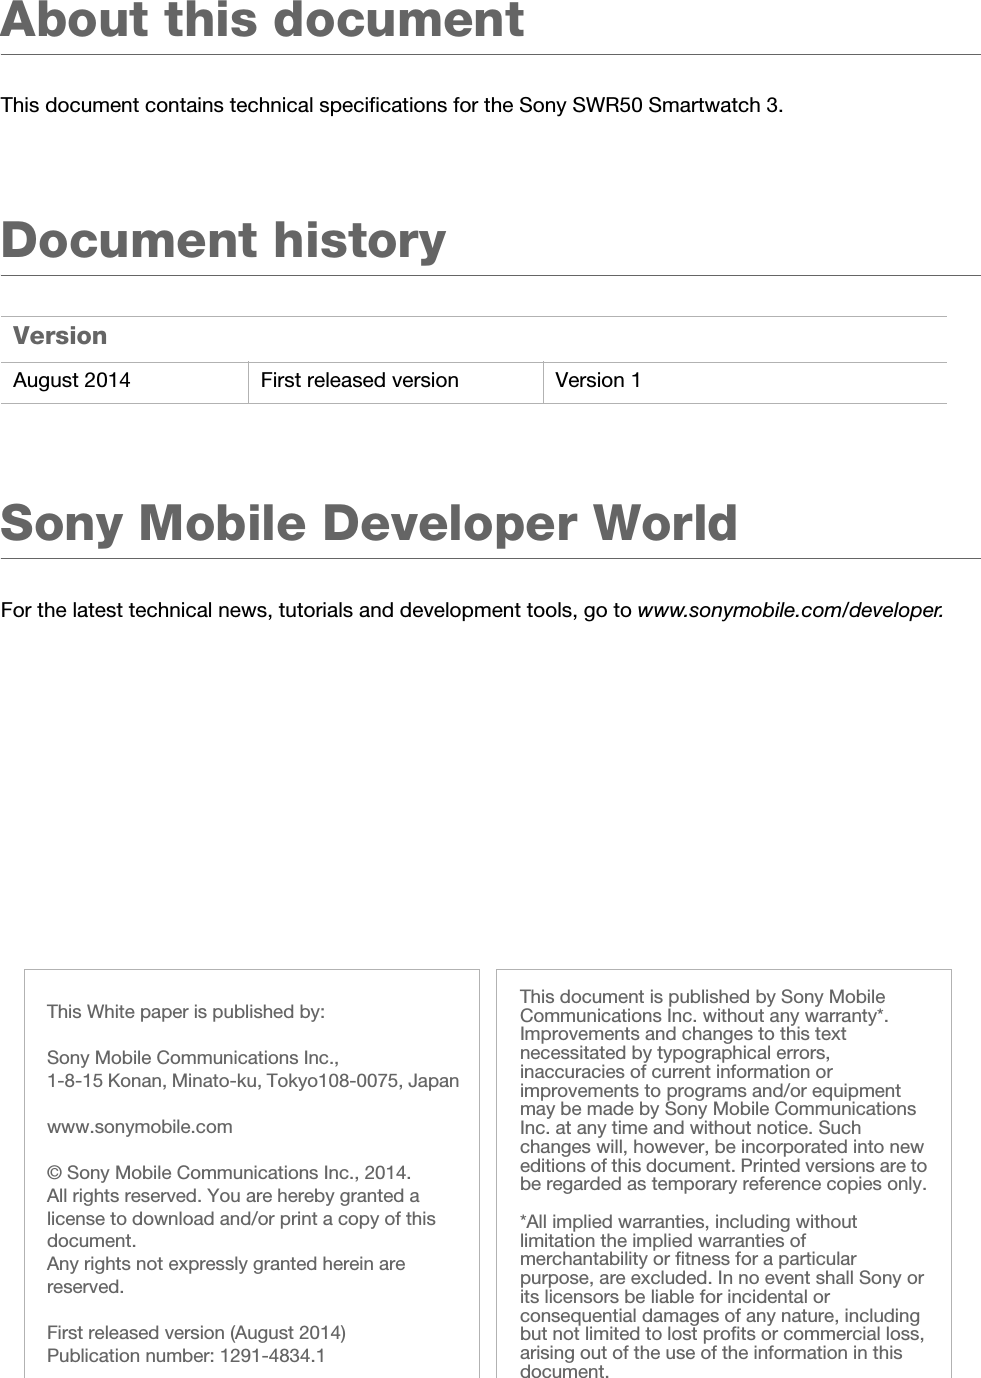 White paper | SWR502 August 2014This document is published by Sony Mobile Communications Inc. without any warranty*. Improvements and changes to this text necessitated by typographical errors, inaccuracies of current information or improvements to programs and/or equipment may be made by Sony Mobile Communications Inc. at any time and without notice. Such changes will, however, be incorporated into new editions of this document. Printed versions are to be regarded as temporary reference copies only.*All implied warranties, including without limitation the implied warranties of merchantability or fitness for a particular purpose, are excluded. In no event shall Sony or its licensors be liable for incidental or consequential damages of any nature, including but not limited to lost profits or commercial loss, arising out of the use of the information in this document.This White paper is published by:Sony Mobile Communications Inc., 1-8-15 Konan, Minato-ku, Tokyo108-0075, Japanwww.sonymobile.com© Sony Mobile Communications Inc., 2014. All rights reserved. You are hereby granted a license to download and/or print a copy of this document. Any rights not expressly granted herein are reserved.First released version (August 2014)Publication number: 1291-4834.1About this documentThis document contains technical specifications for the Sony SWR50 Smartwatch 3.Document historySony Mobile Developer WorldFor the latest technical news, tutorials and development tools, go to www.sonymobile.com/developer.VersionAugust 2014 First released version Version 1